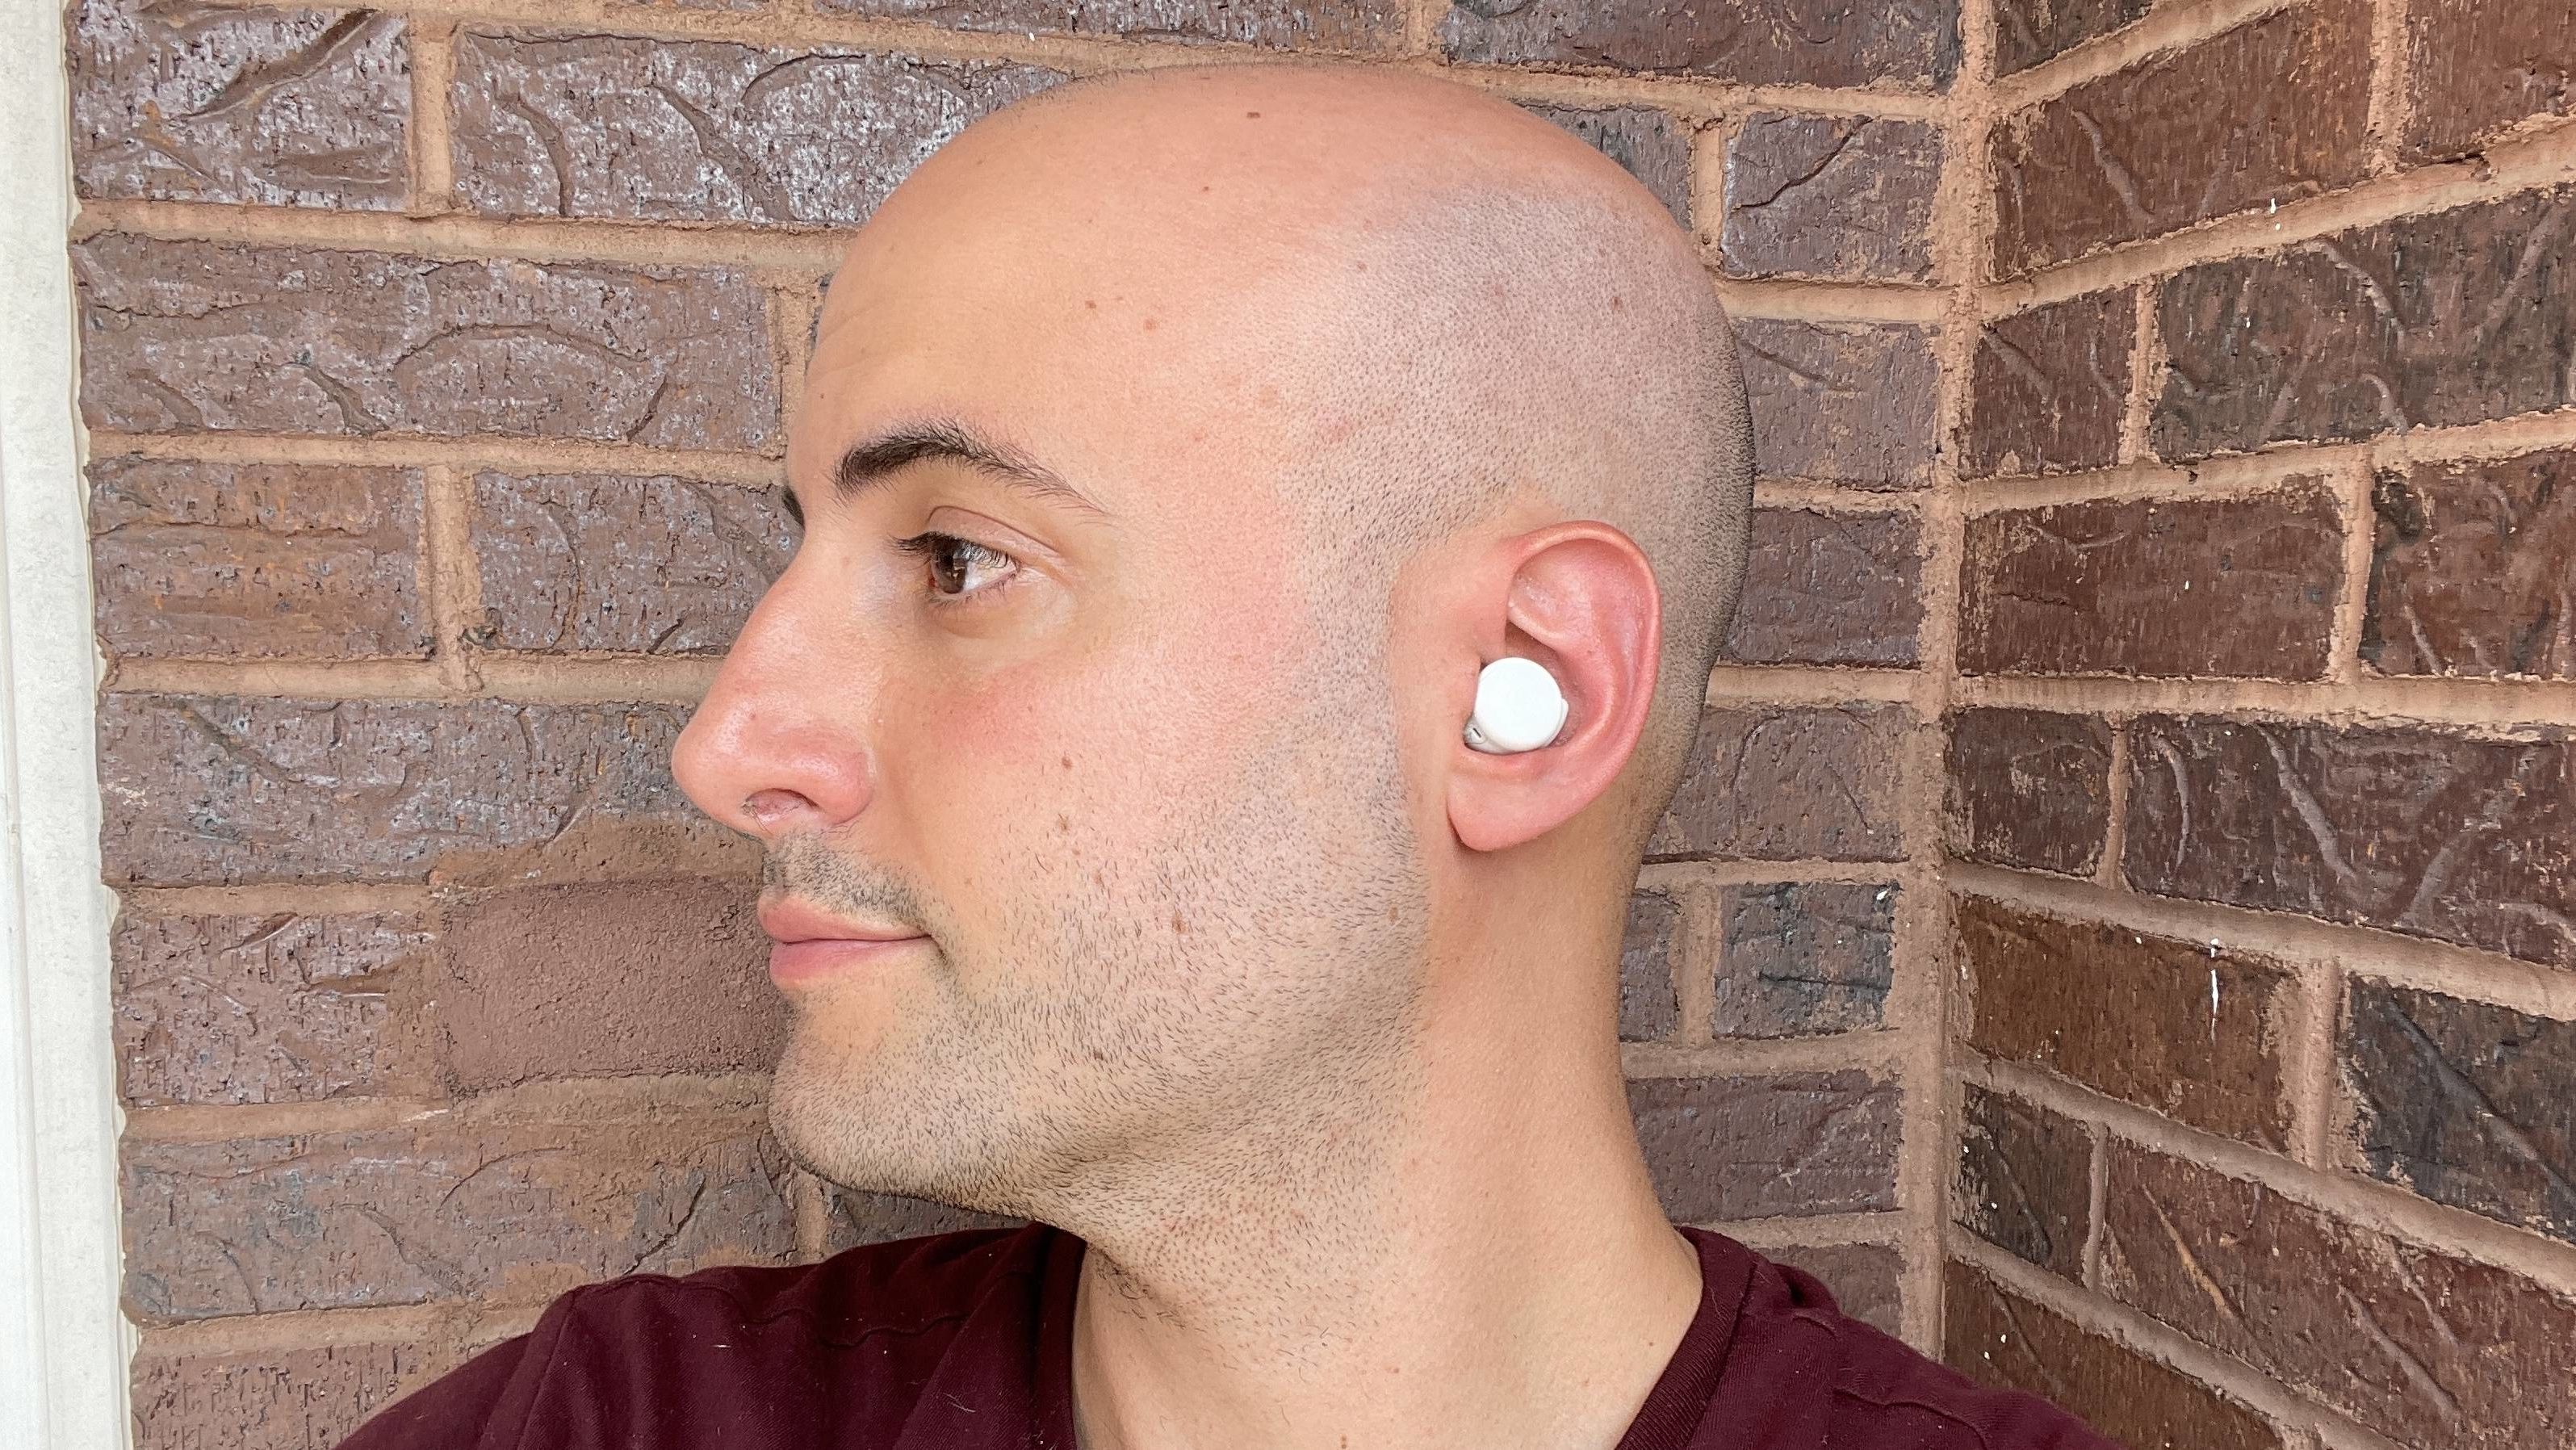 Are Google's $99 Pixel Buds A-Series a supreme bargain? (review) 